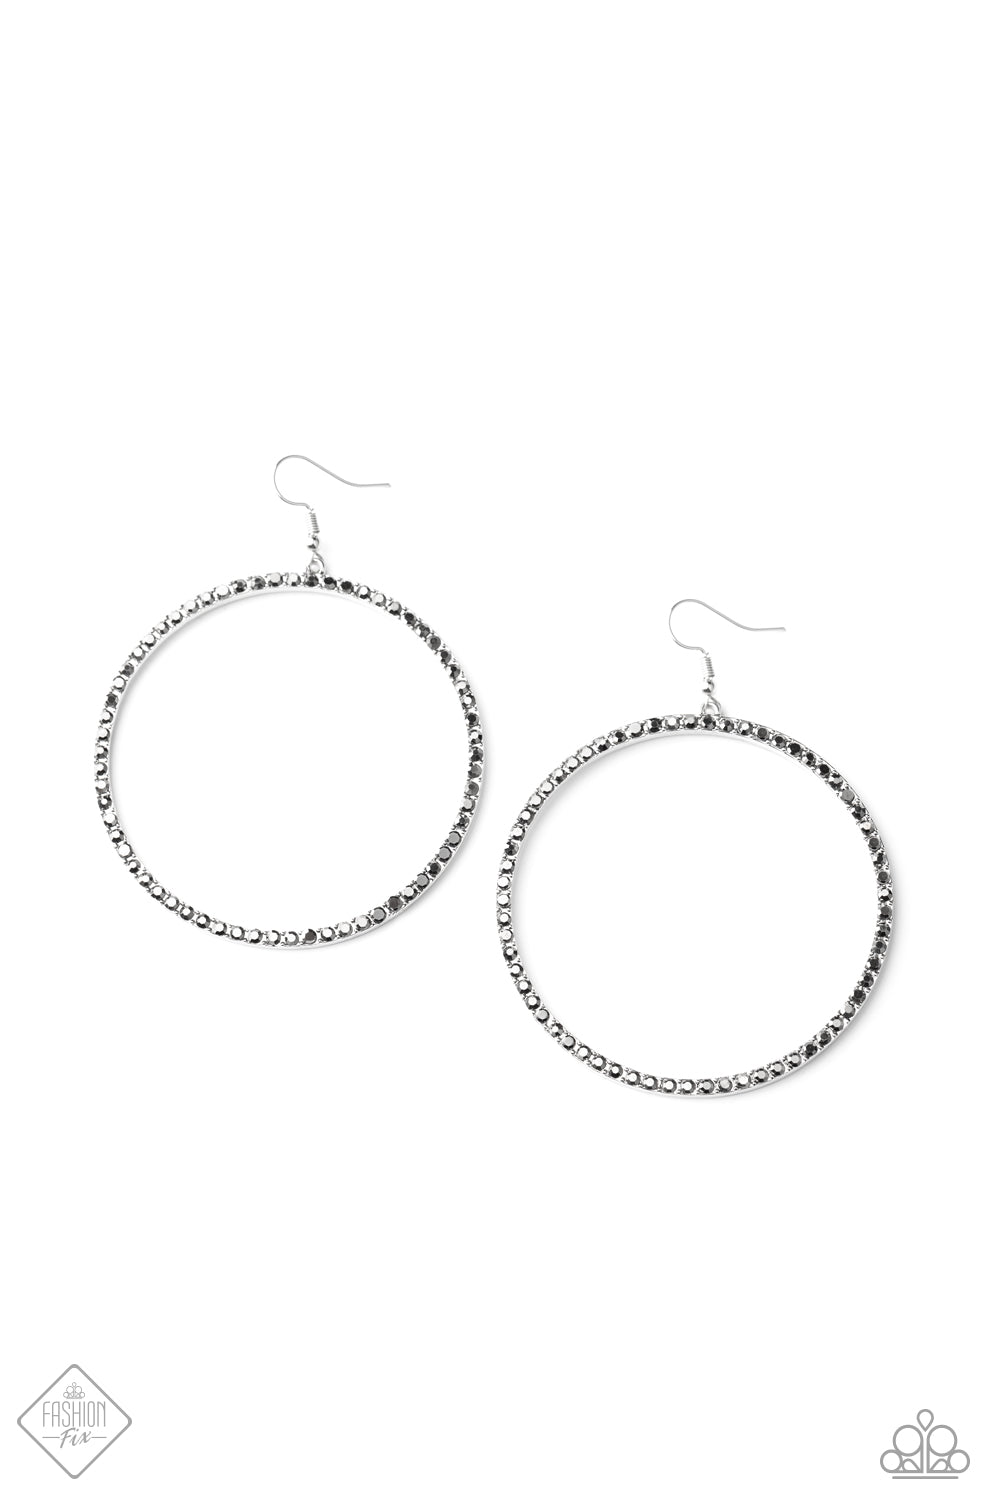 Paparazzi Wide Curves Ahead Silver Fishhook Earrings - Fashion Fix Magnificent Musings December 2020